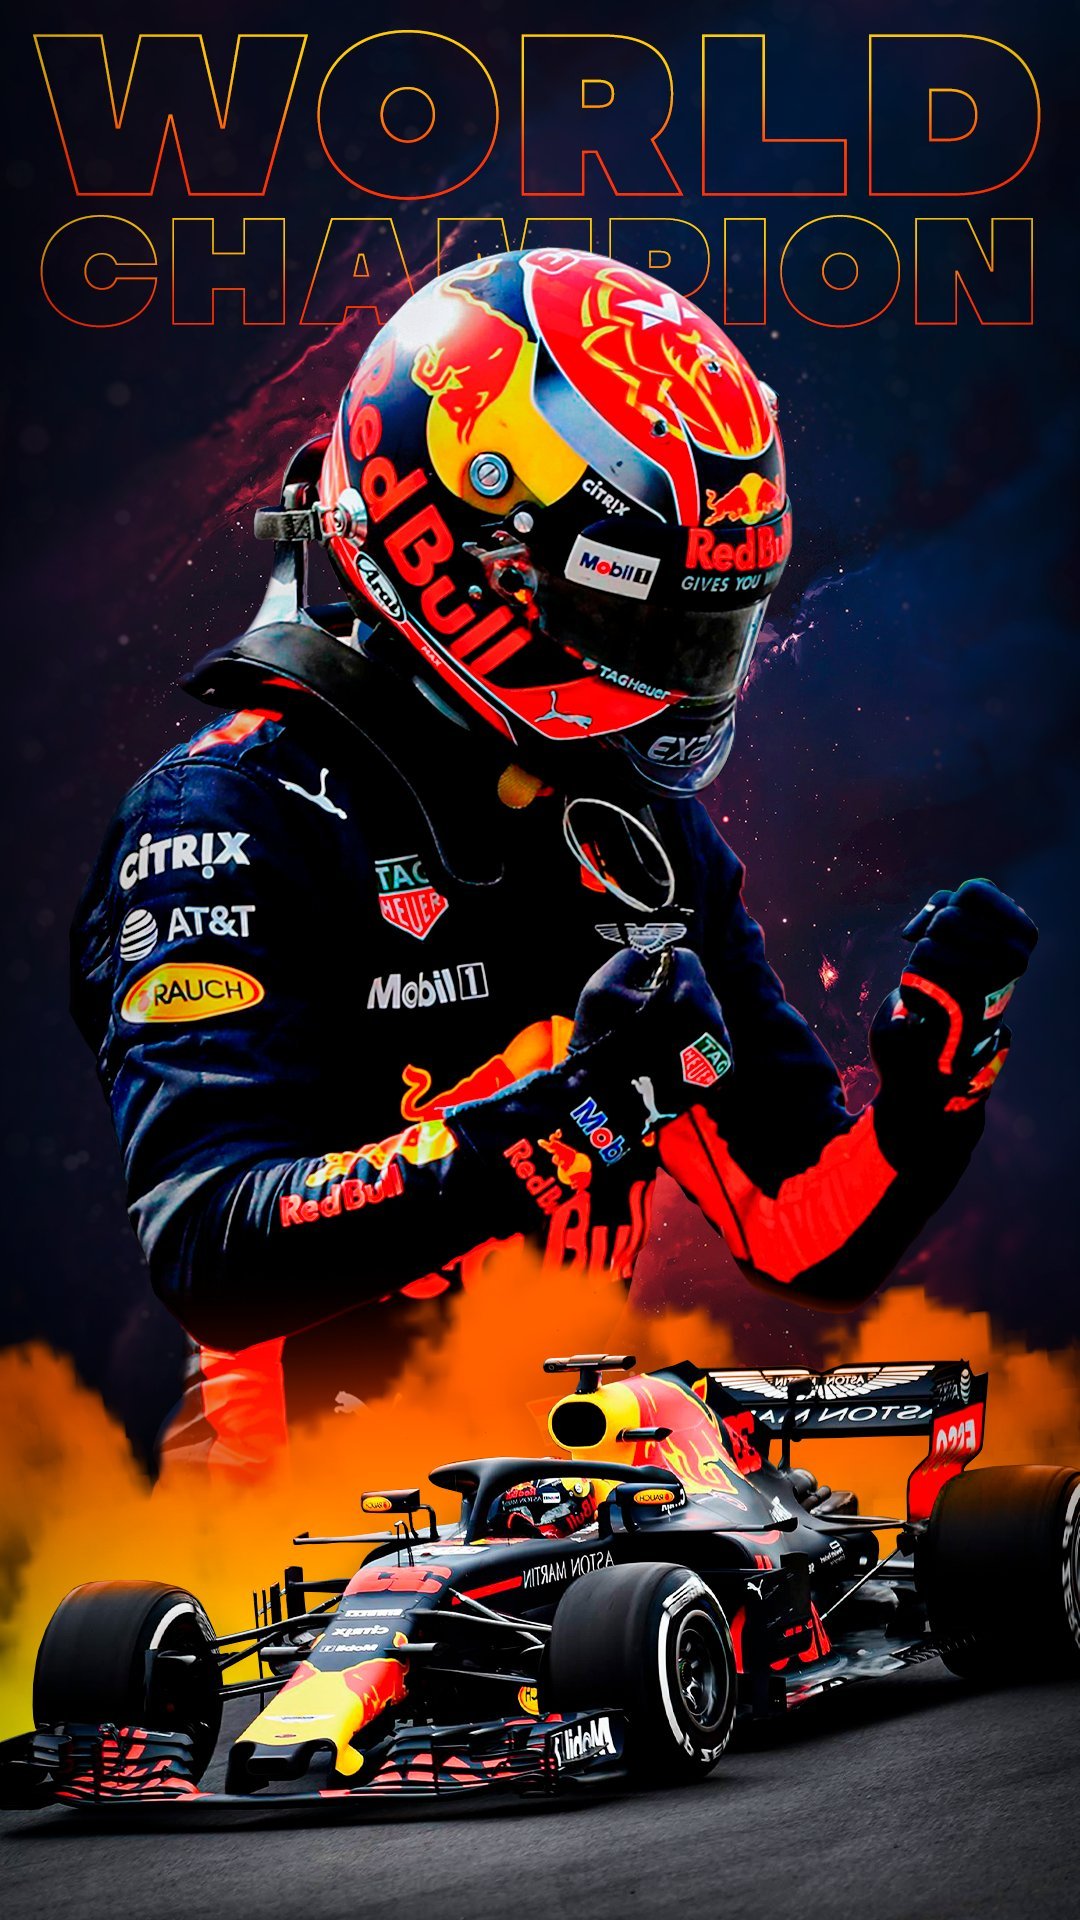 Zacho tried to make an F1 background of Max Verstappen